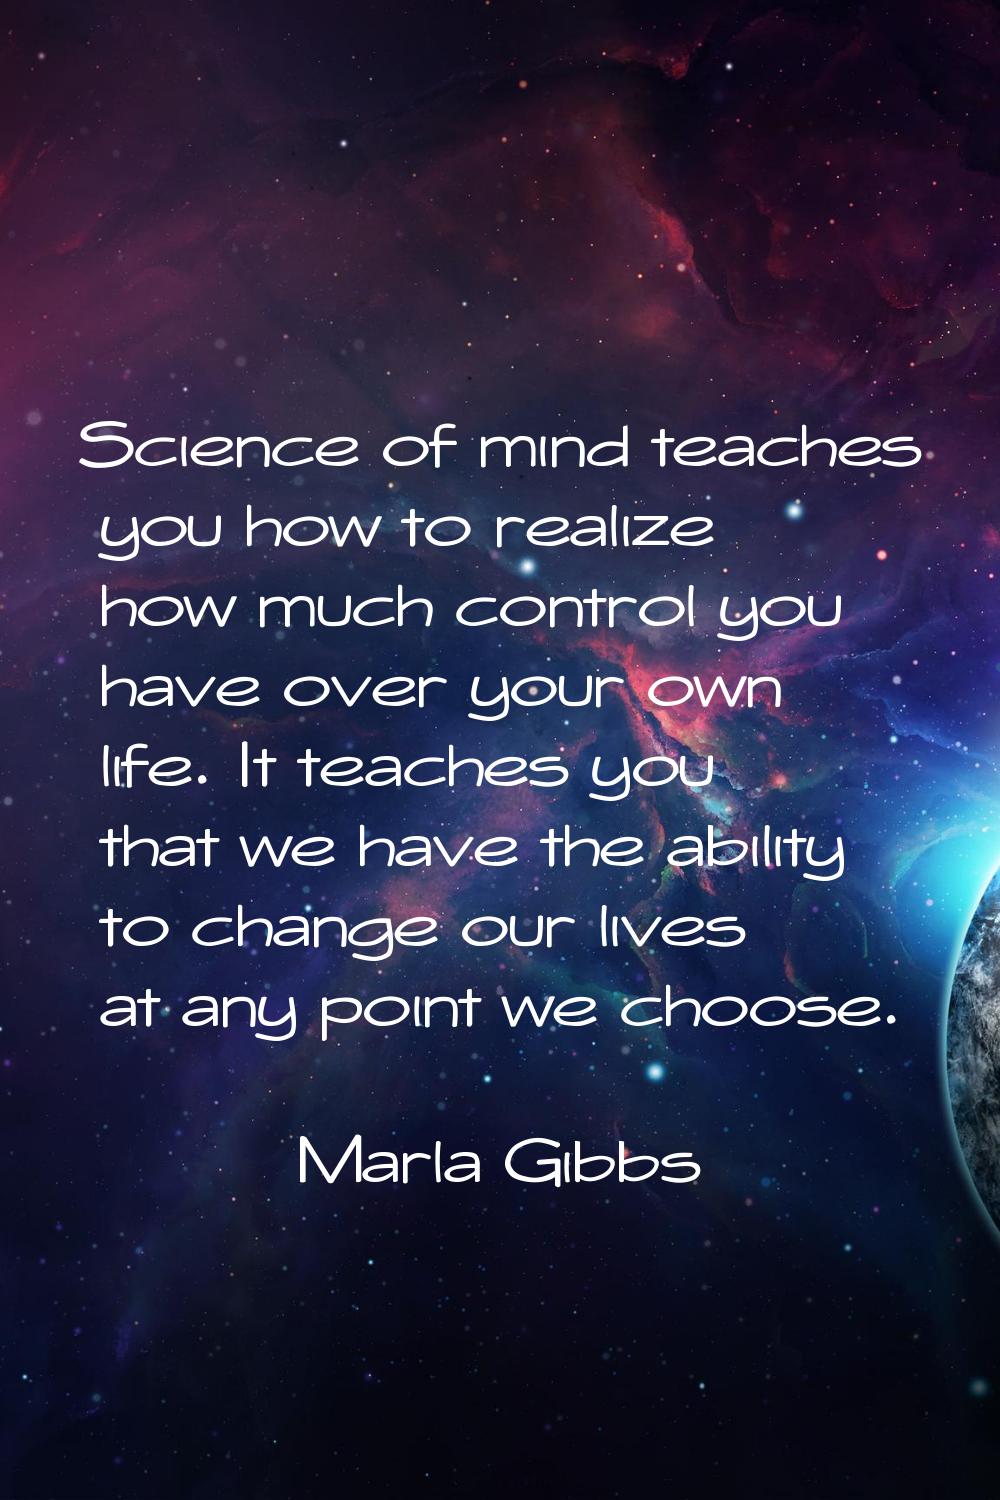 Science of mind teaches you how to realize how much control you have over your own life. It teaches